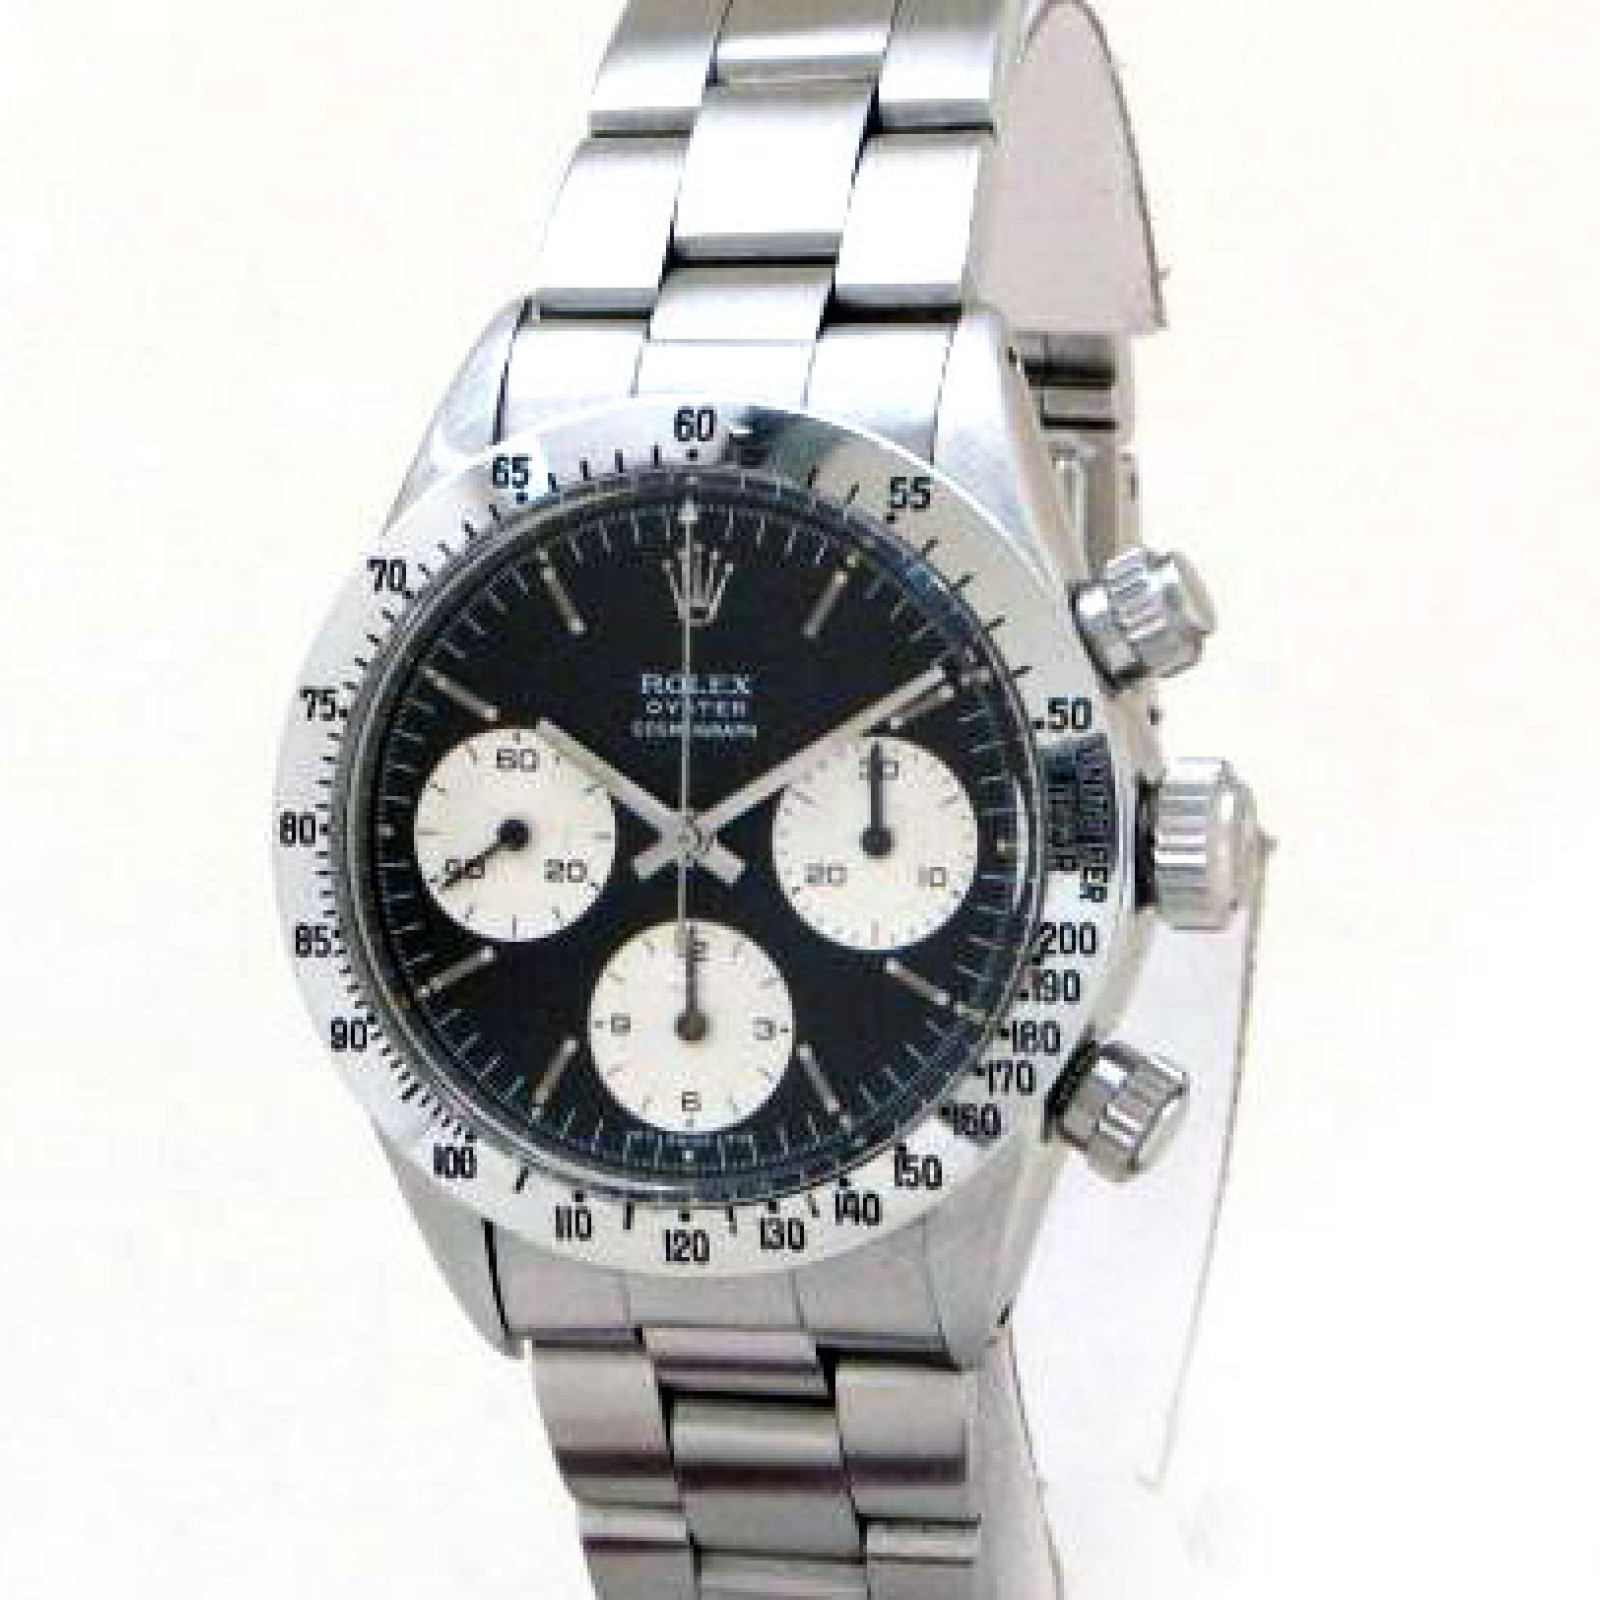 Vintage Rolex Chronograph 6265 Steel with Black Dial